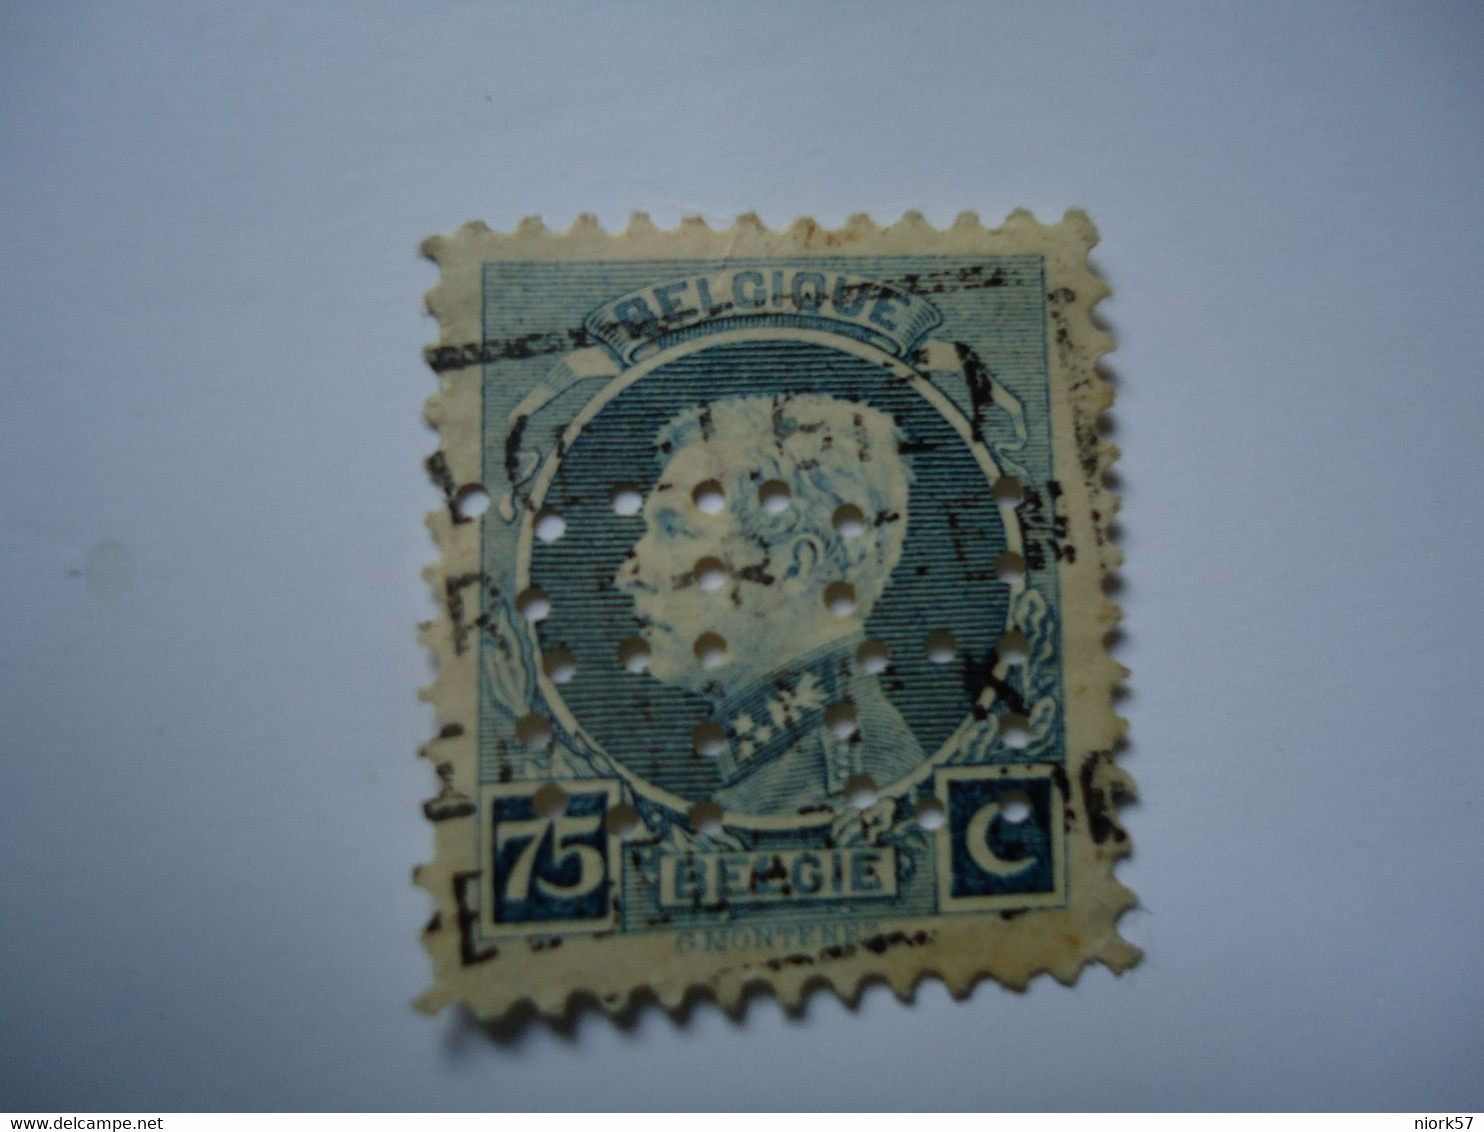 BELGIUM  USED STAMPS WITH PERFINS  2 SCAN  WITH  POSTMARK - Unclassified